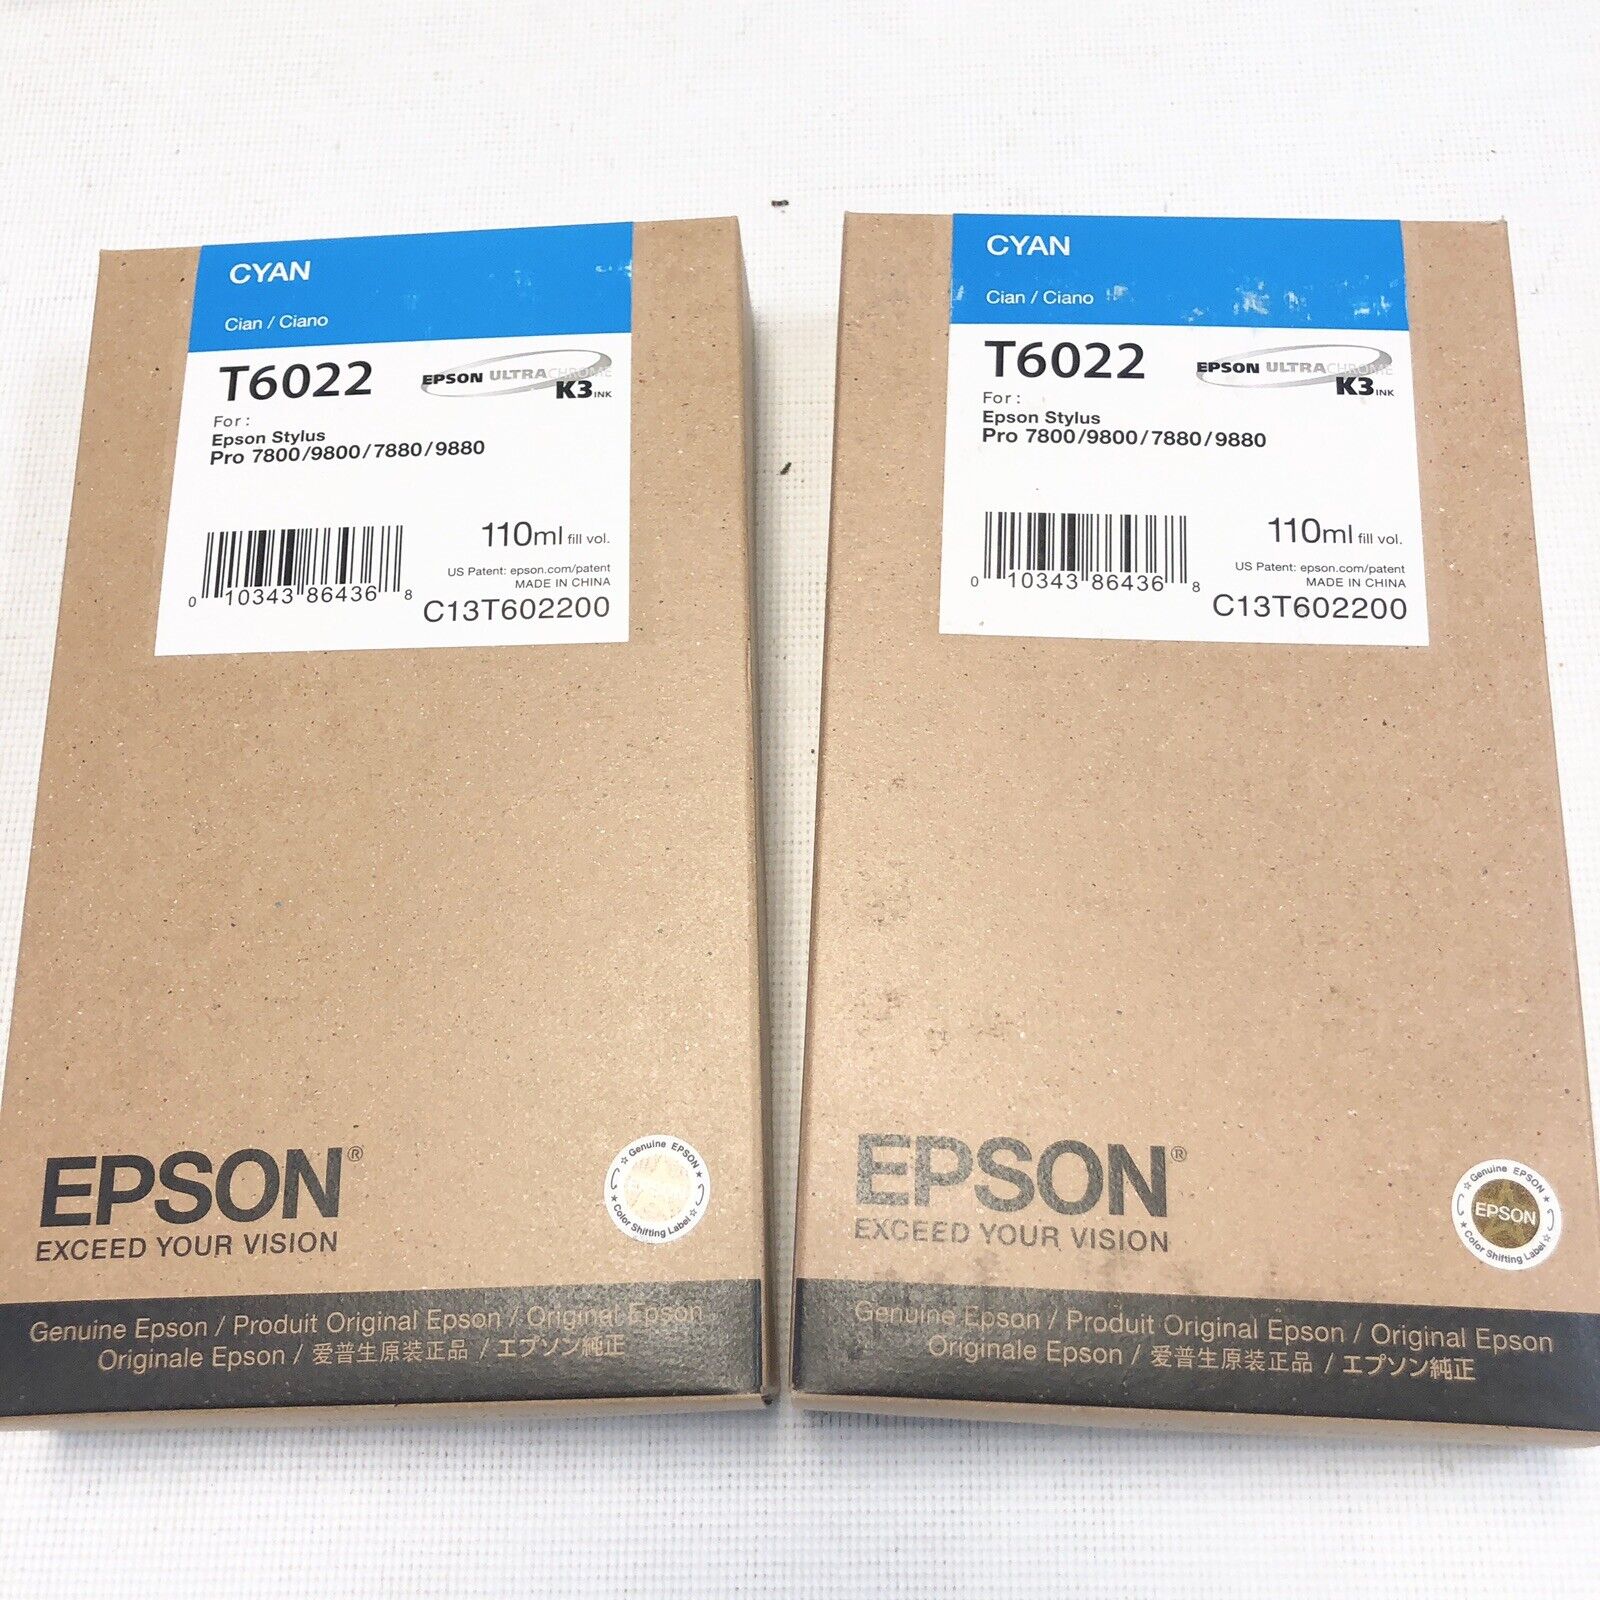 Lot of 2x Genuine Epson T6022 Cyan Ink Cartridges Expired: 12-2019